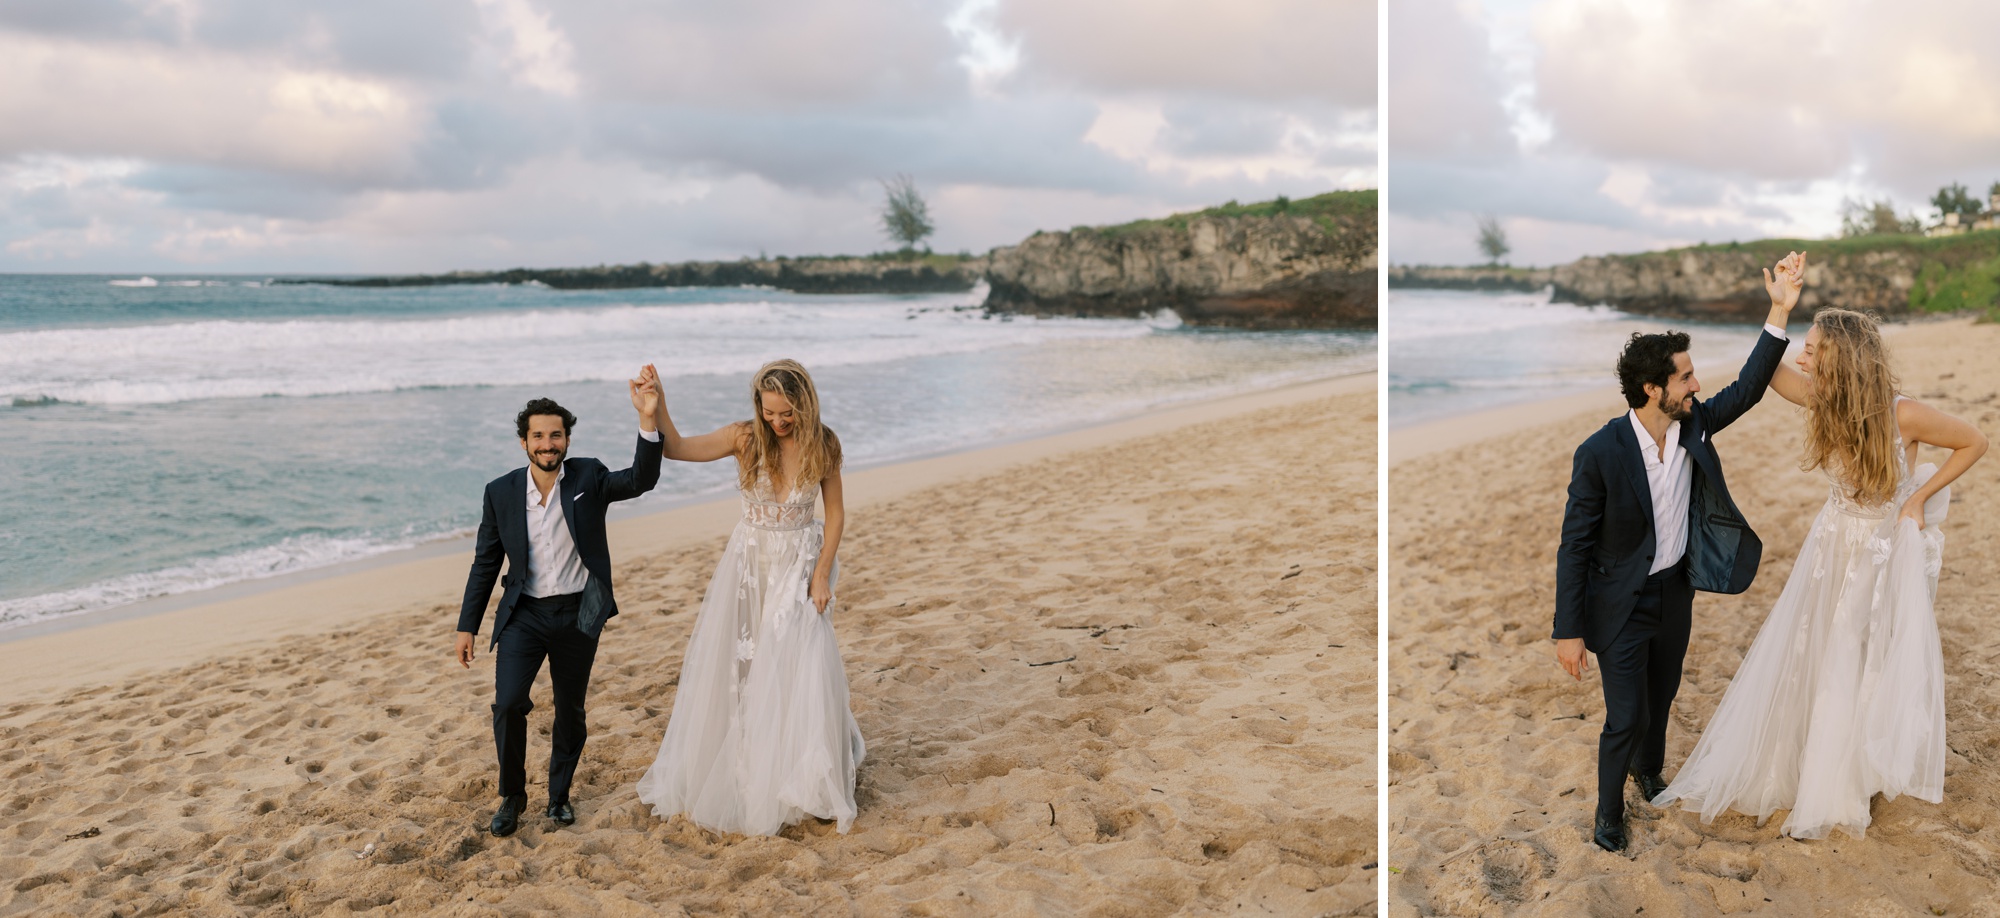 couple celebrating elopement with arms in the air 